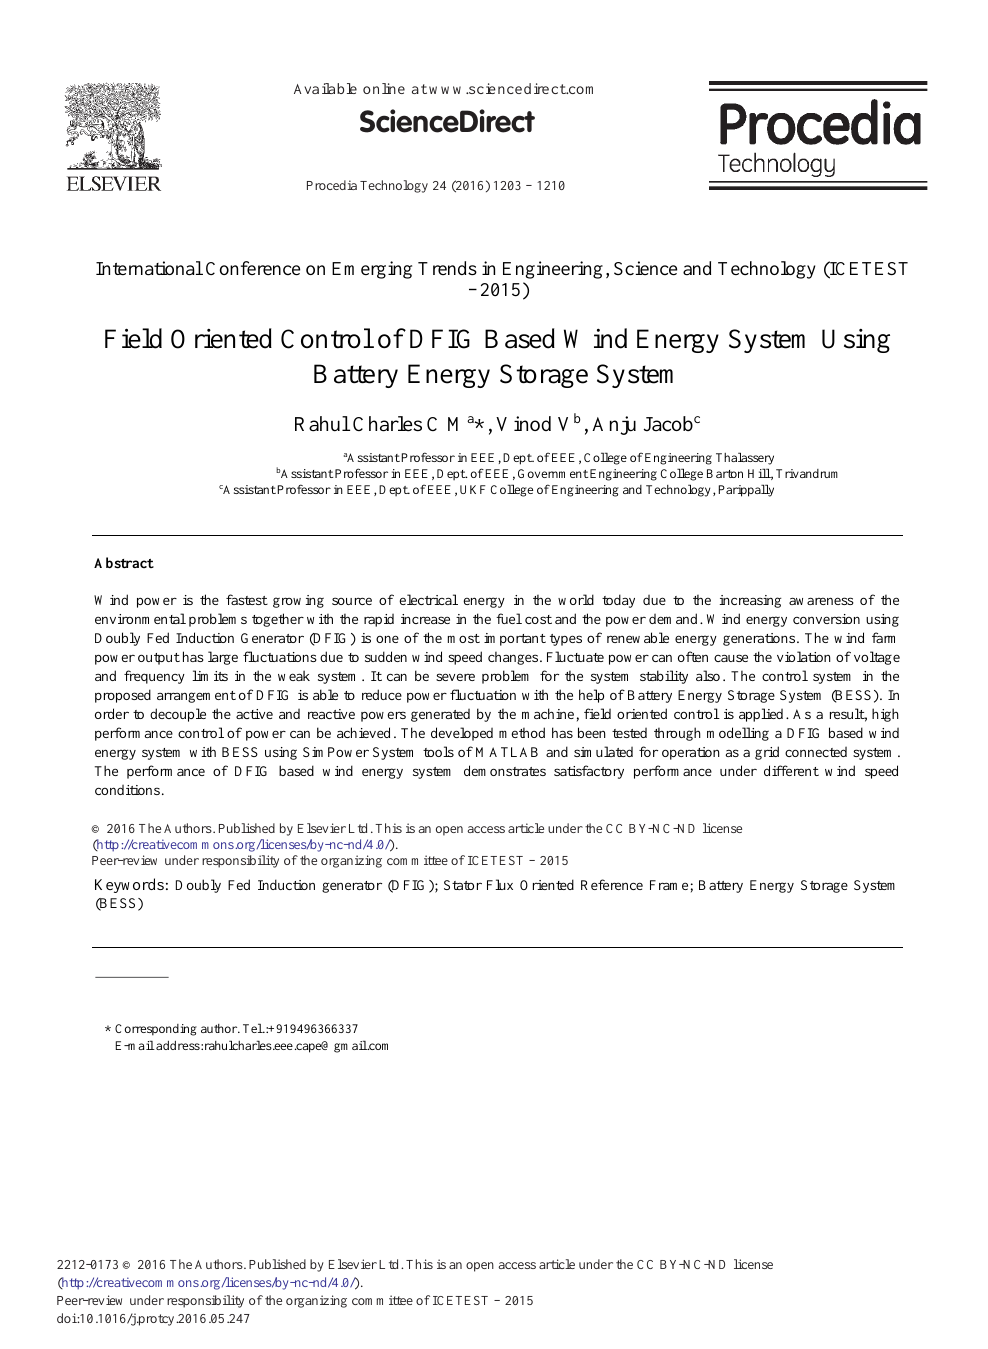 Super-rated operational concept for increased wind turbine power with  energy storage - ScienceDirect